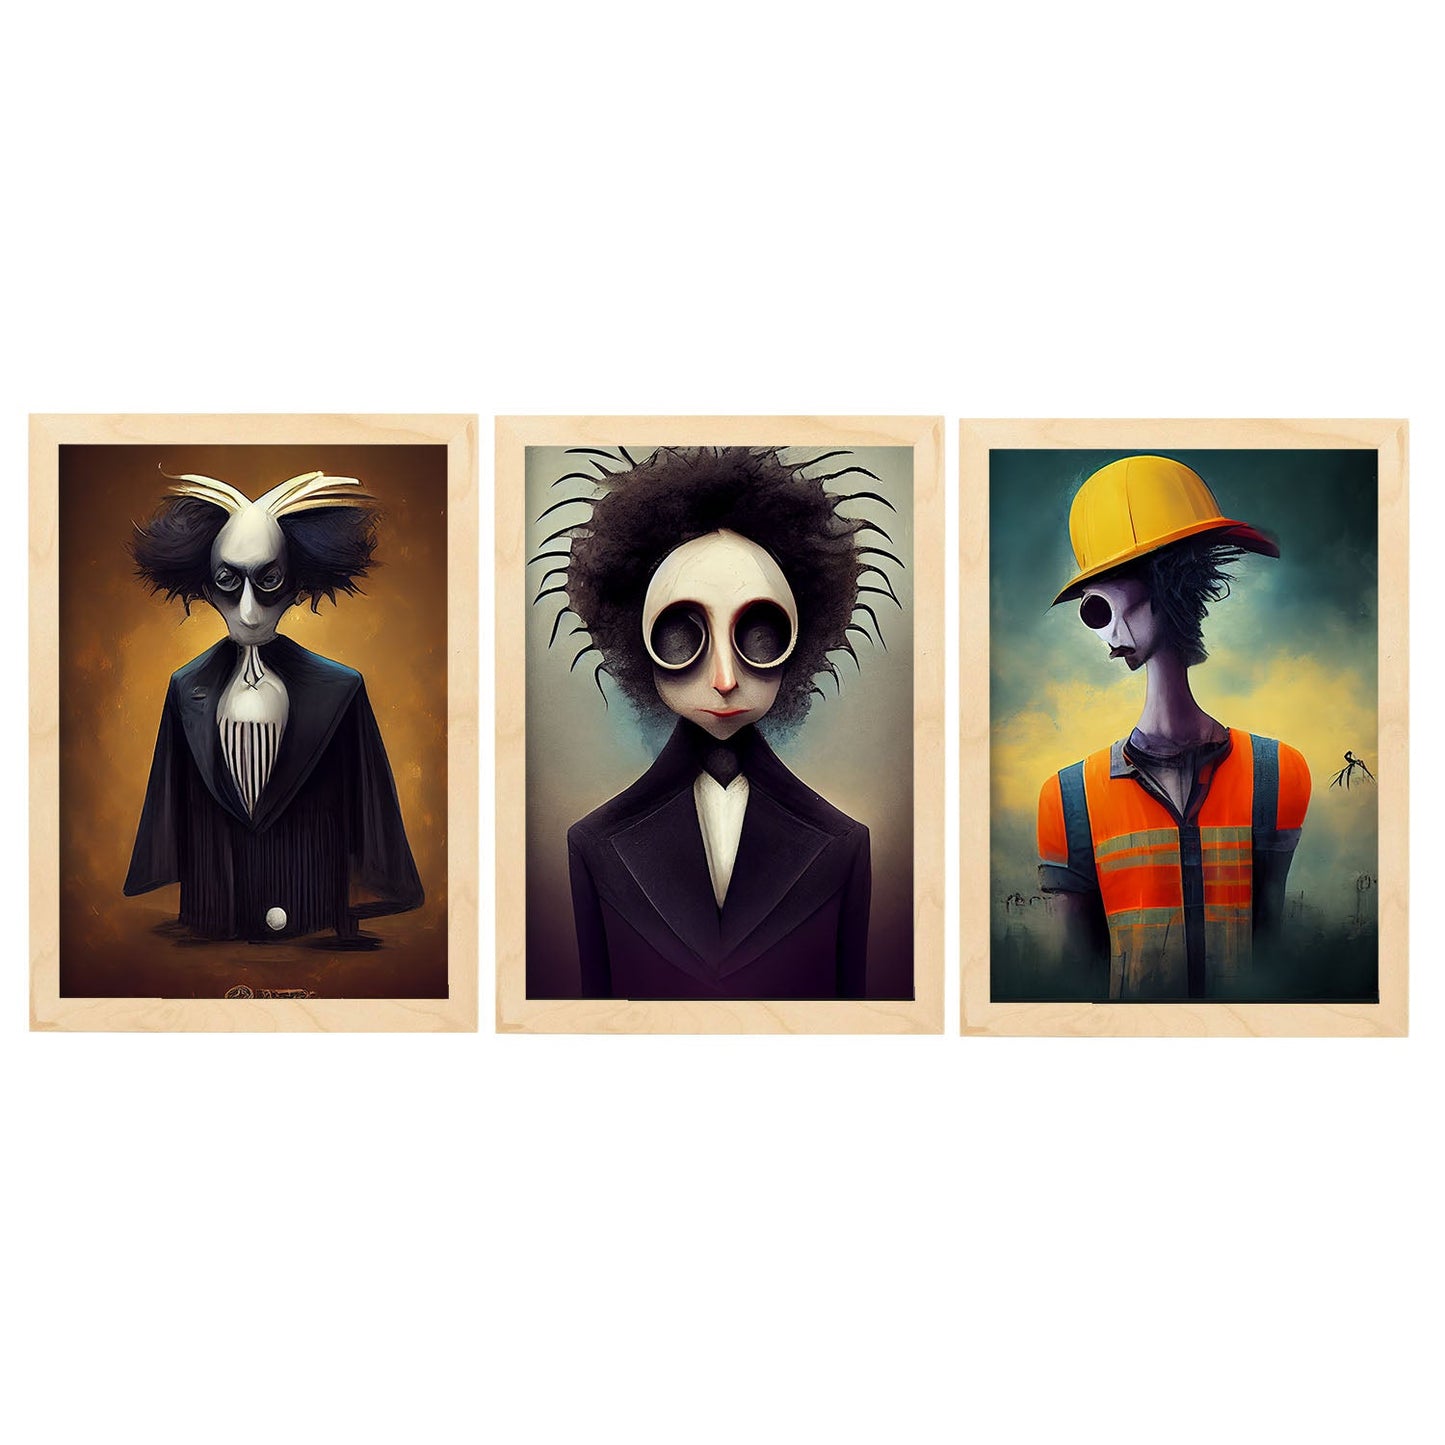 Burton style Animal Illustrations and Posters inspired by Burton's Dark and Goth art Interior Design and Decoration Sets Collection 24-Artwork-Nacnic-A4-Marco Madera clara-Nacnic Estudio SL